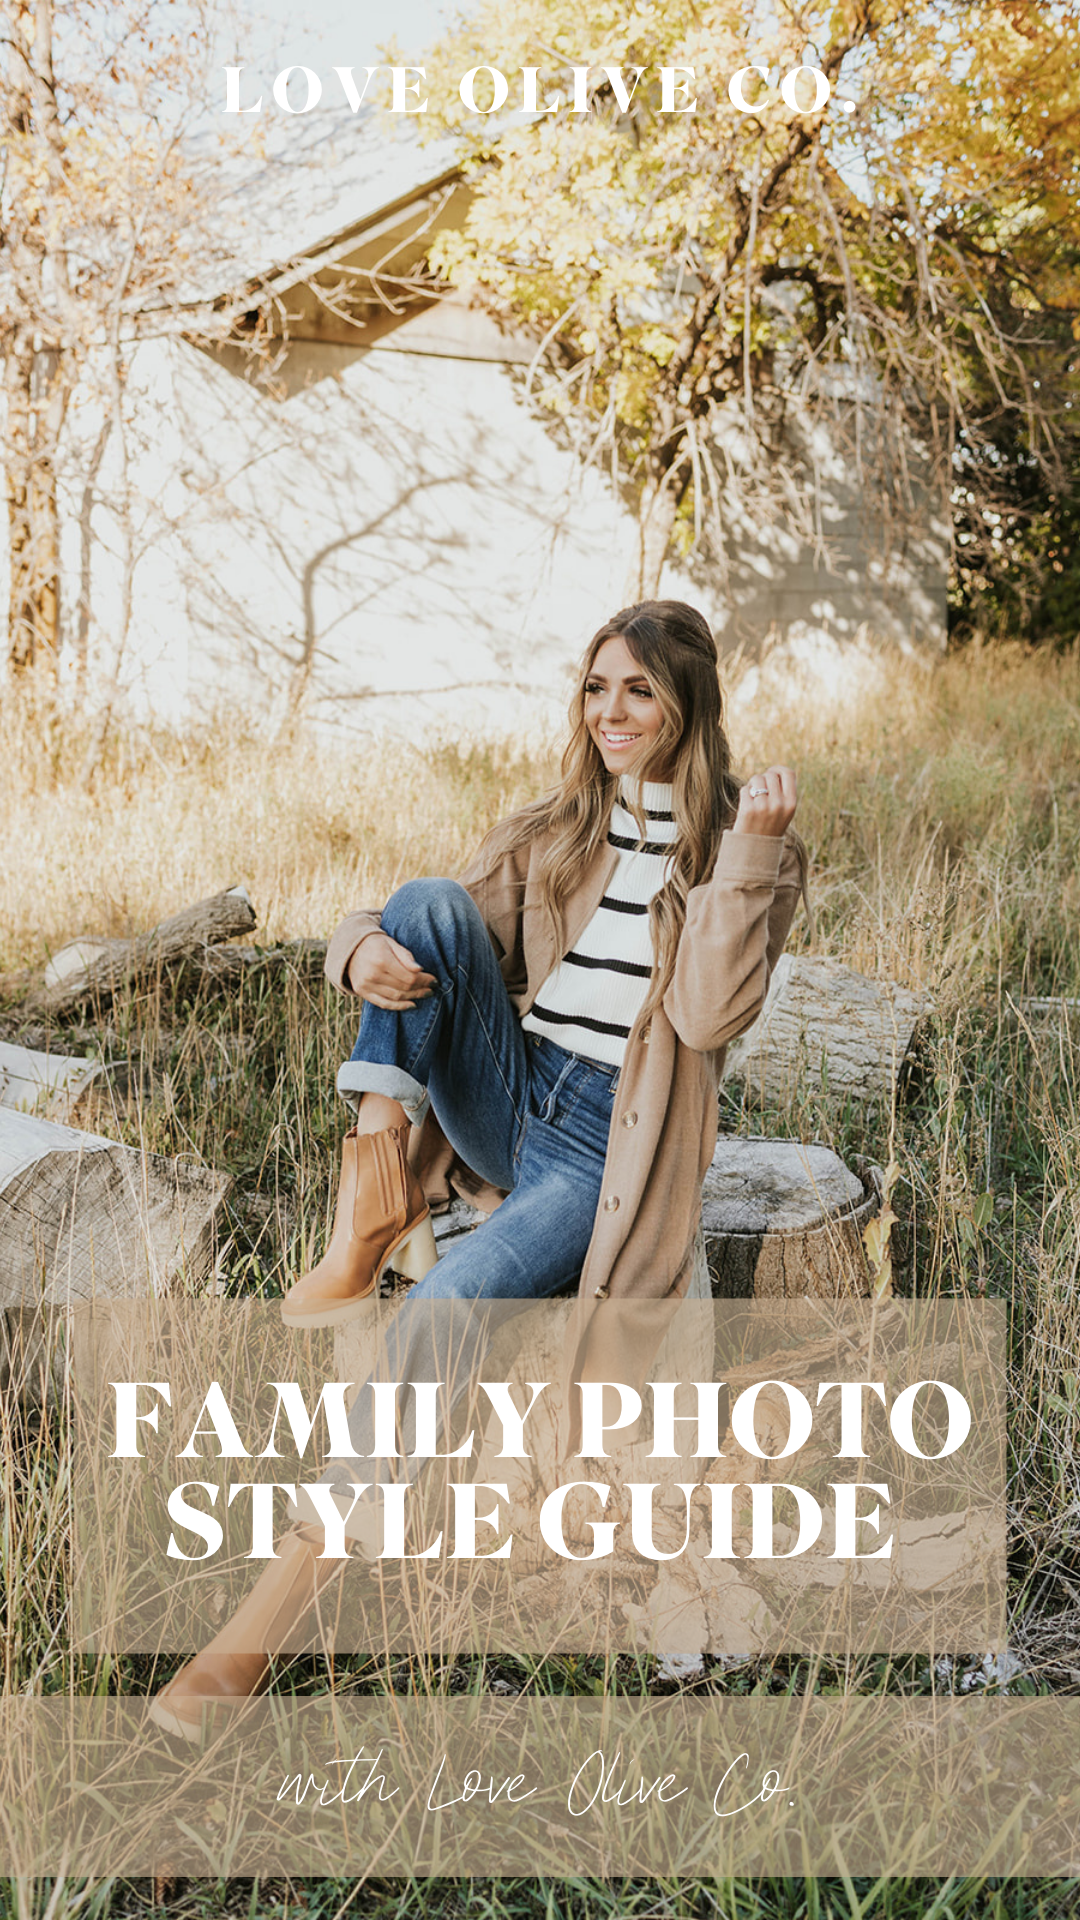 family photo style guide with love olive co. www.loveoliveco.com